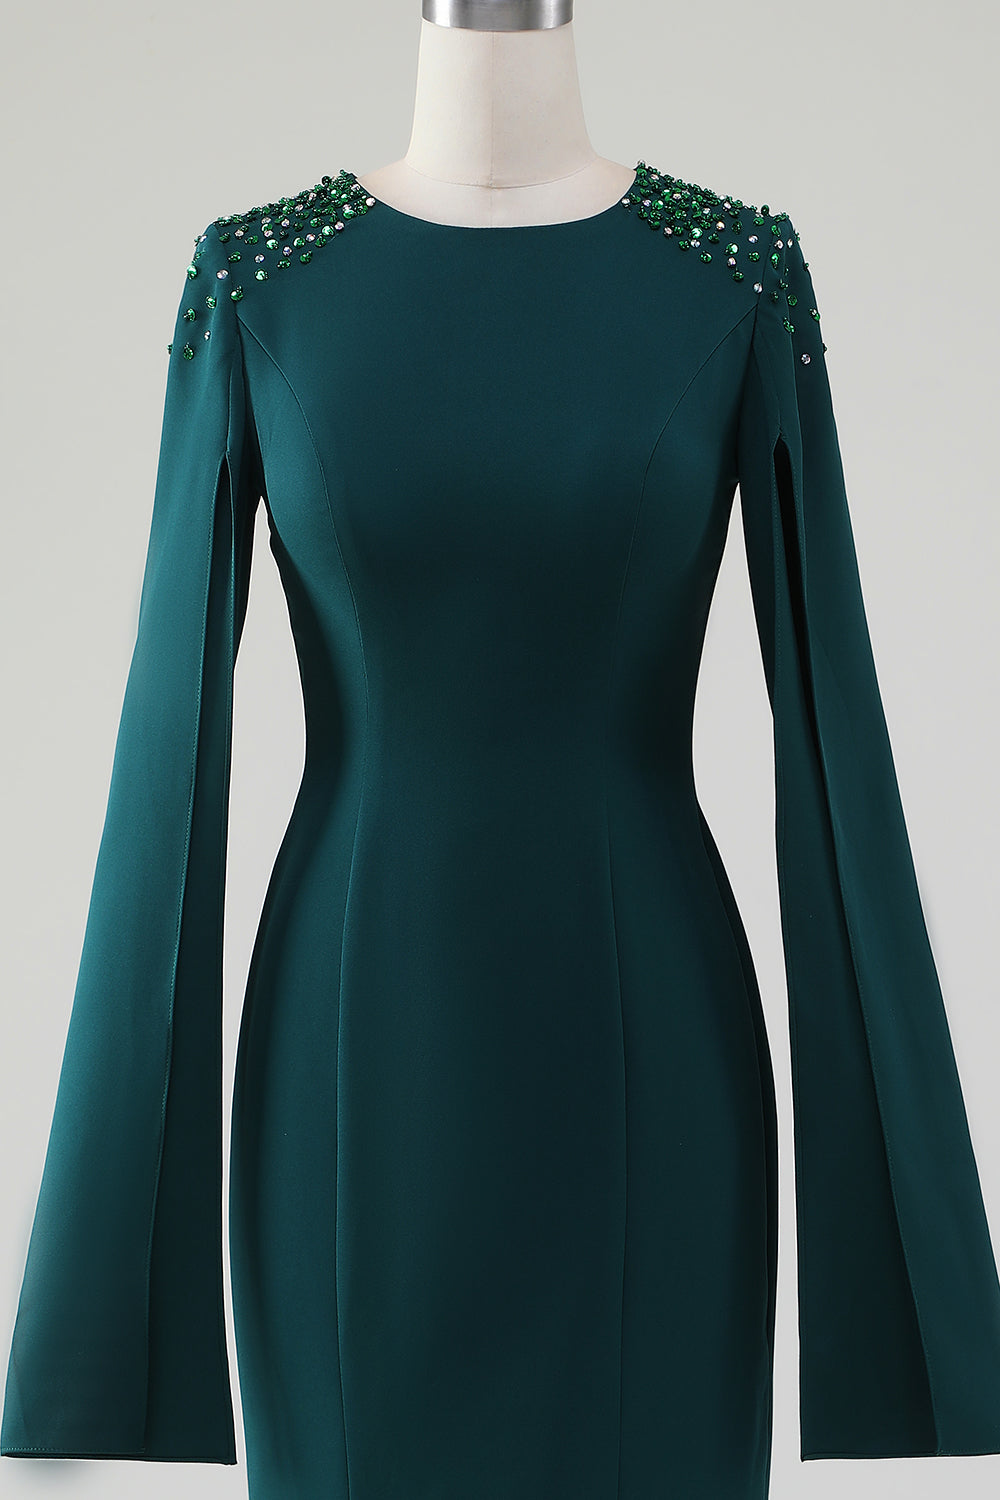 Dark Green Mermaid Round Neck Mother Of Bride Dress With Beaded Cape Sleeves